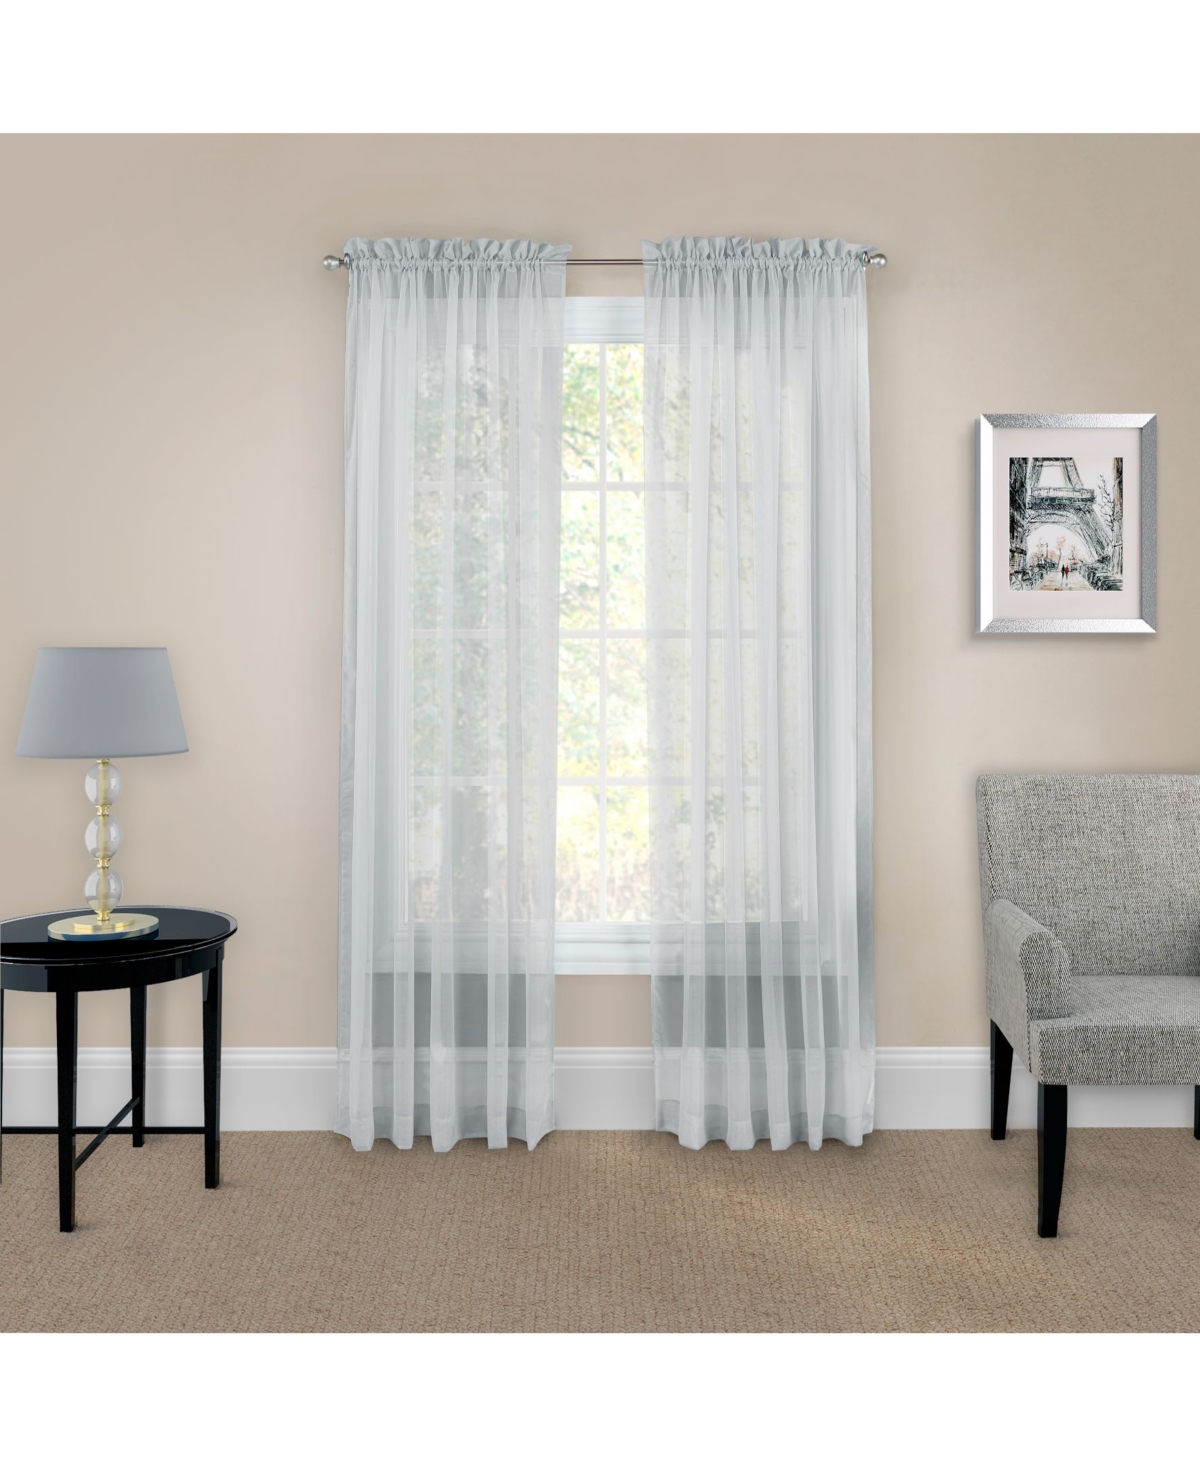 Eclipse Pairs To Go Victoria Voile 84" X 118" Curtain Panel, Set Of 2 In Charcoal